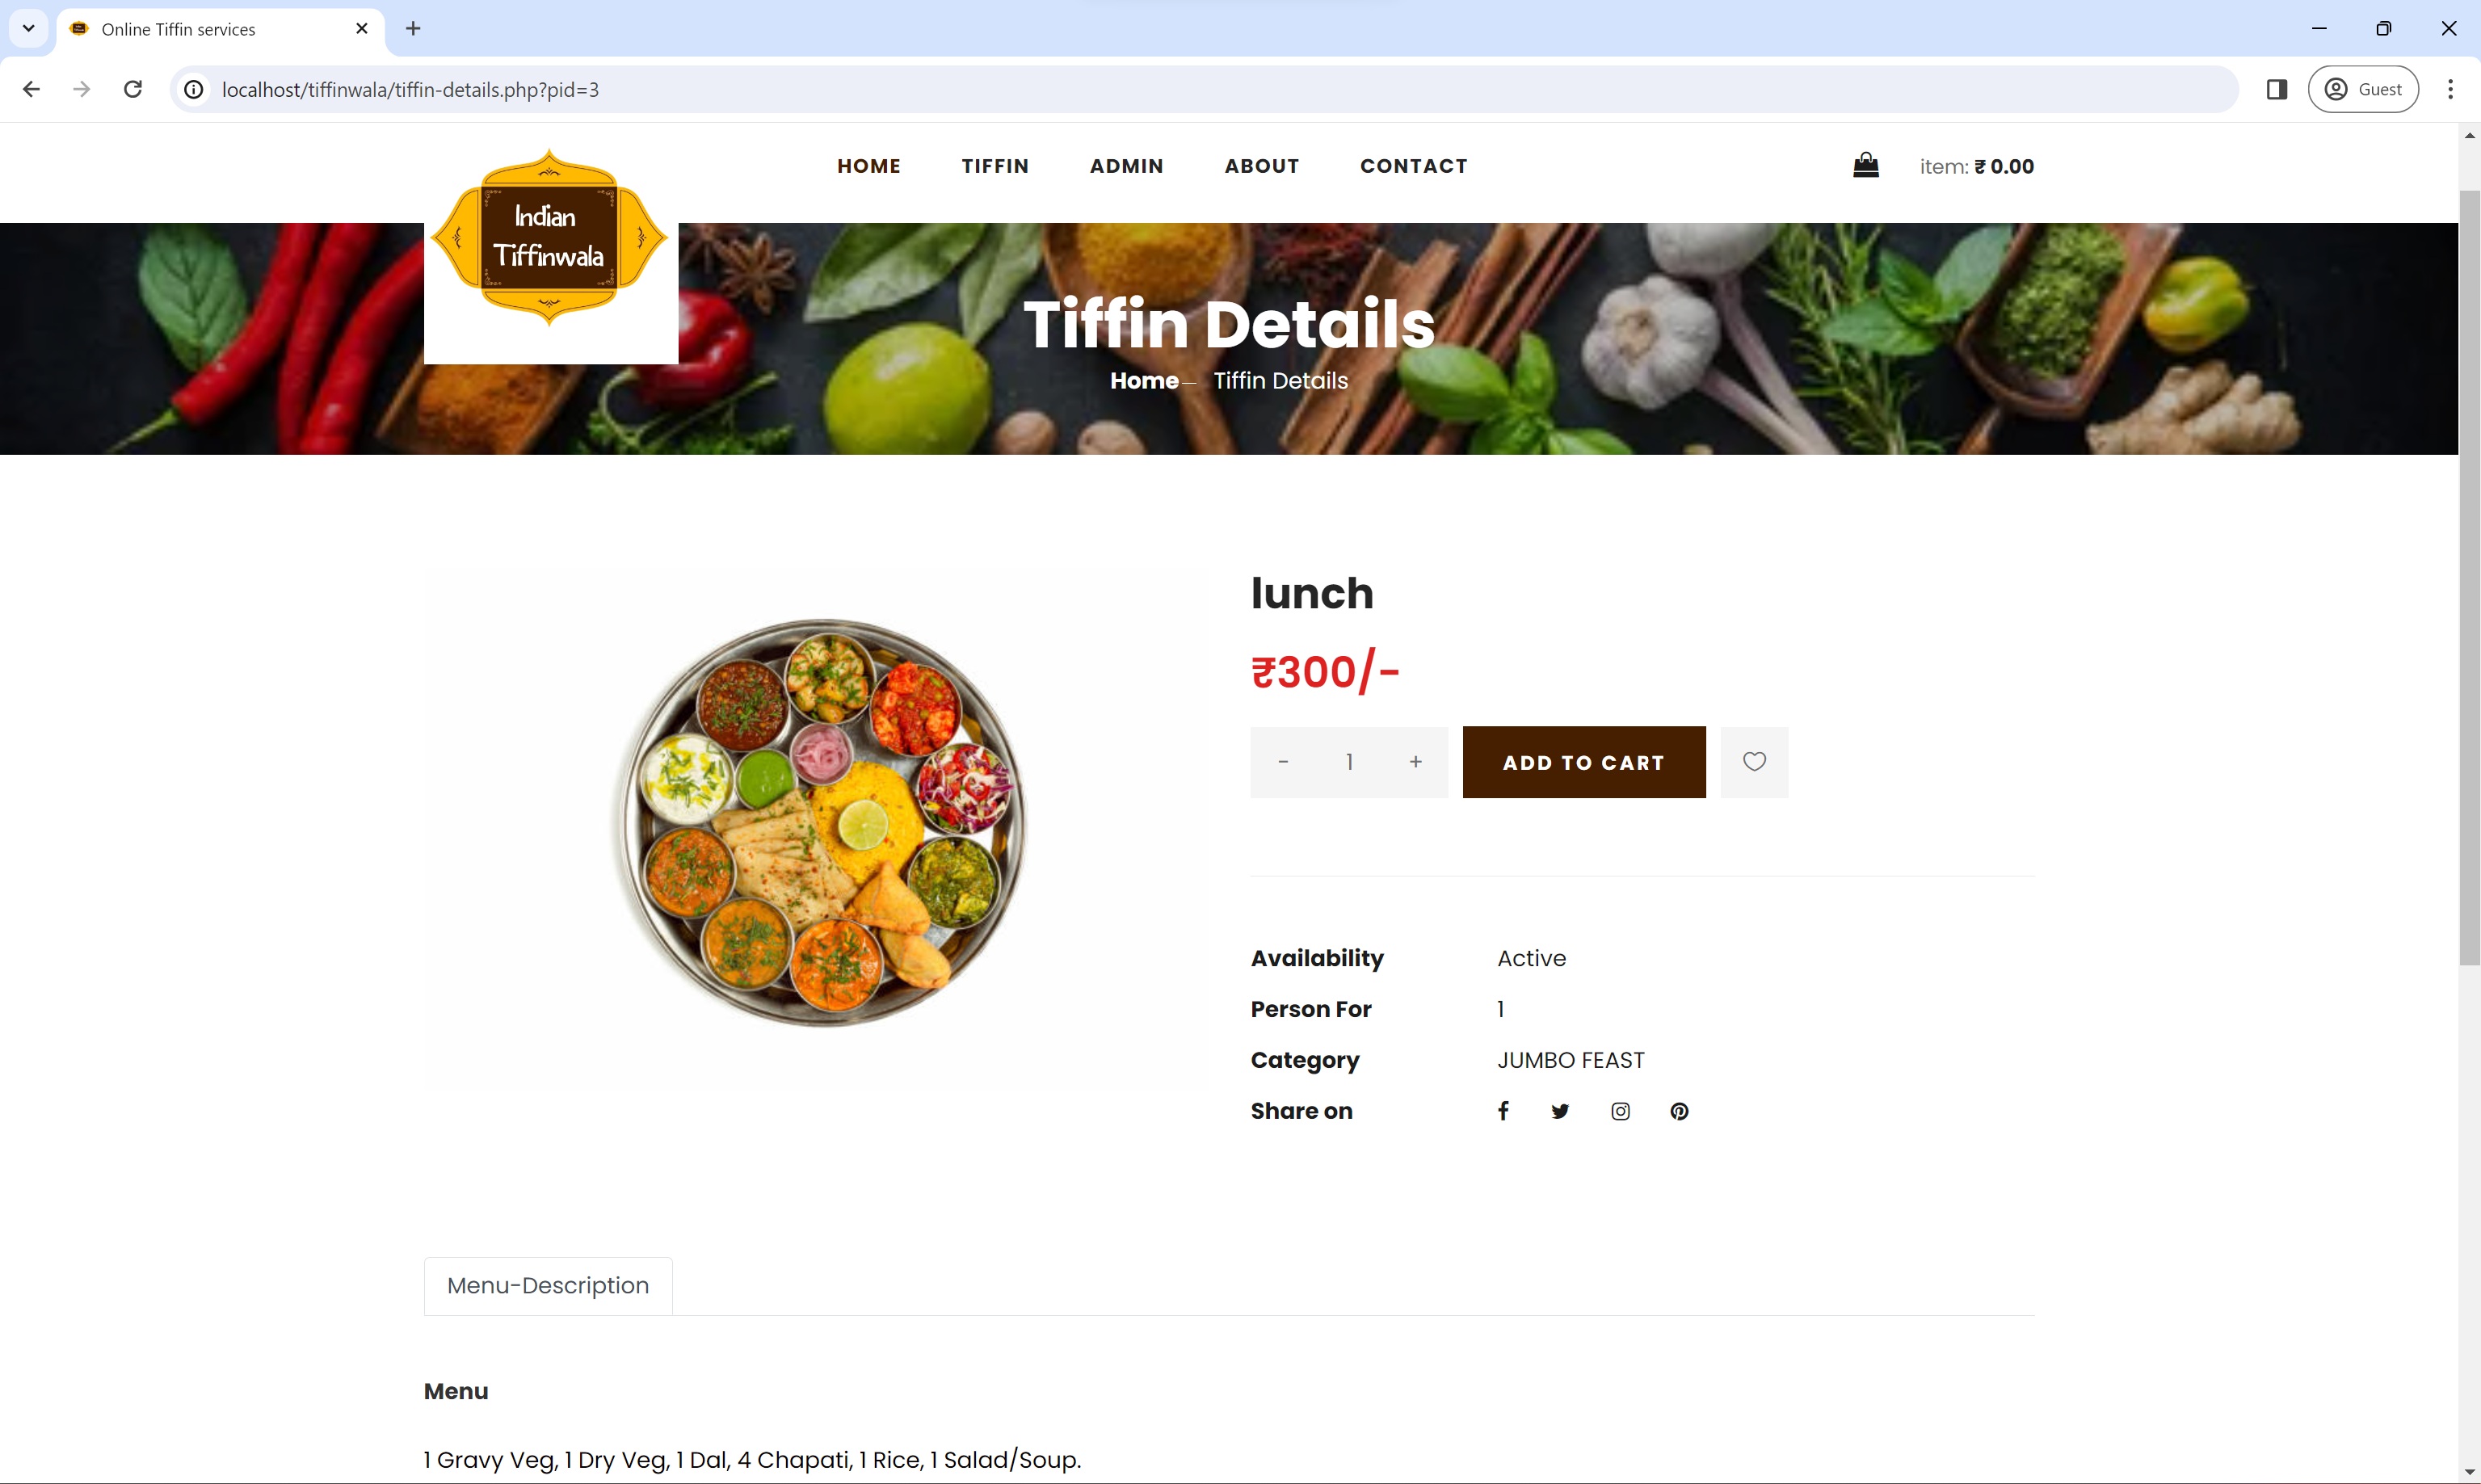  Online Tiffin Management System Project In Php